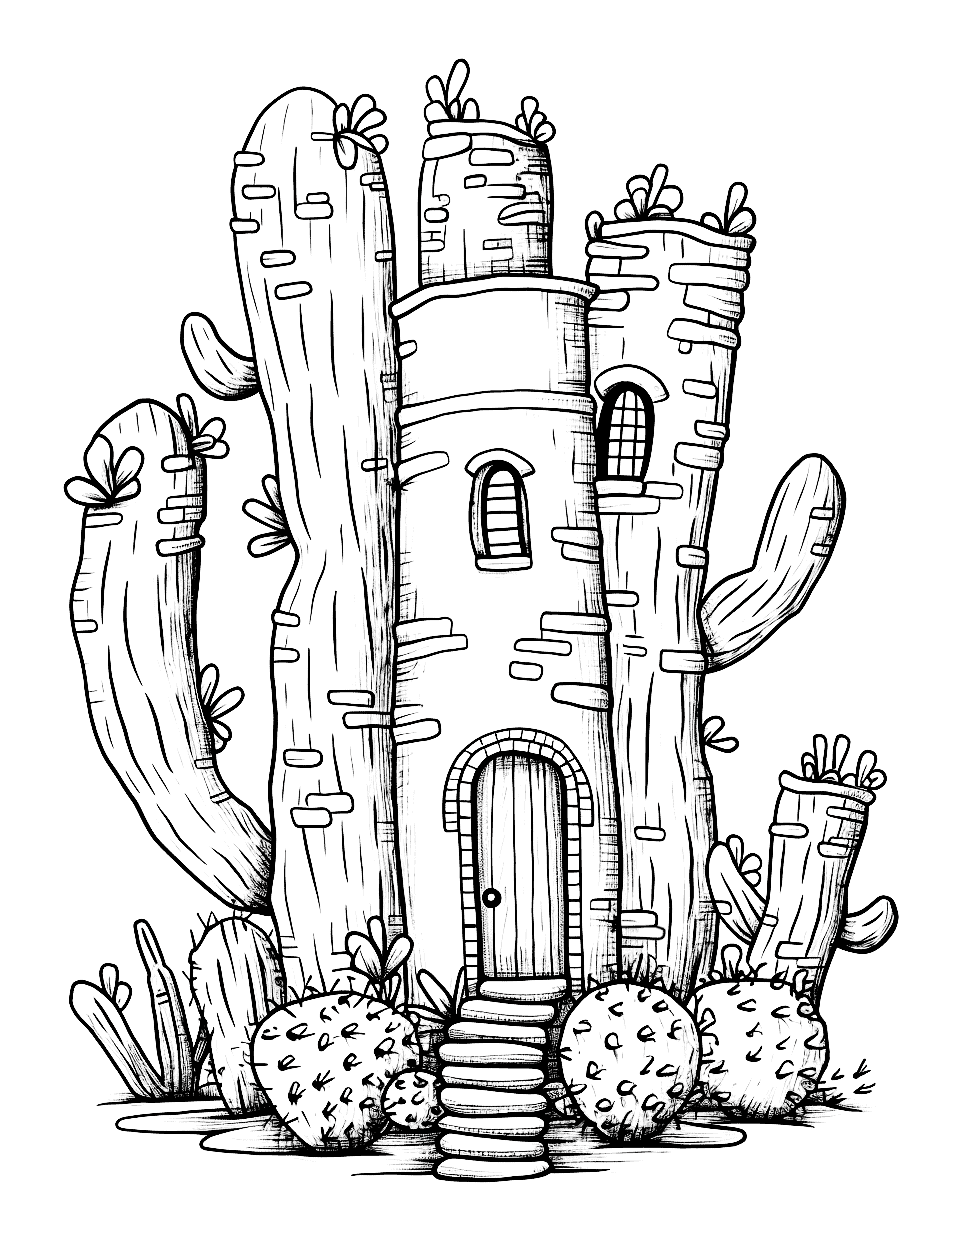 Fairytale Cactus Castle Coloring Page - A cactus transformed into a whimsical fairytale castle.